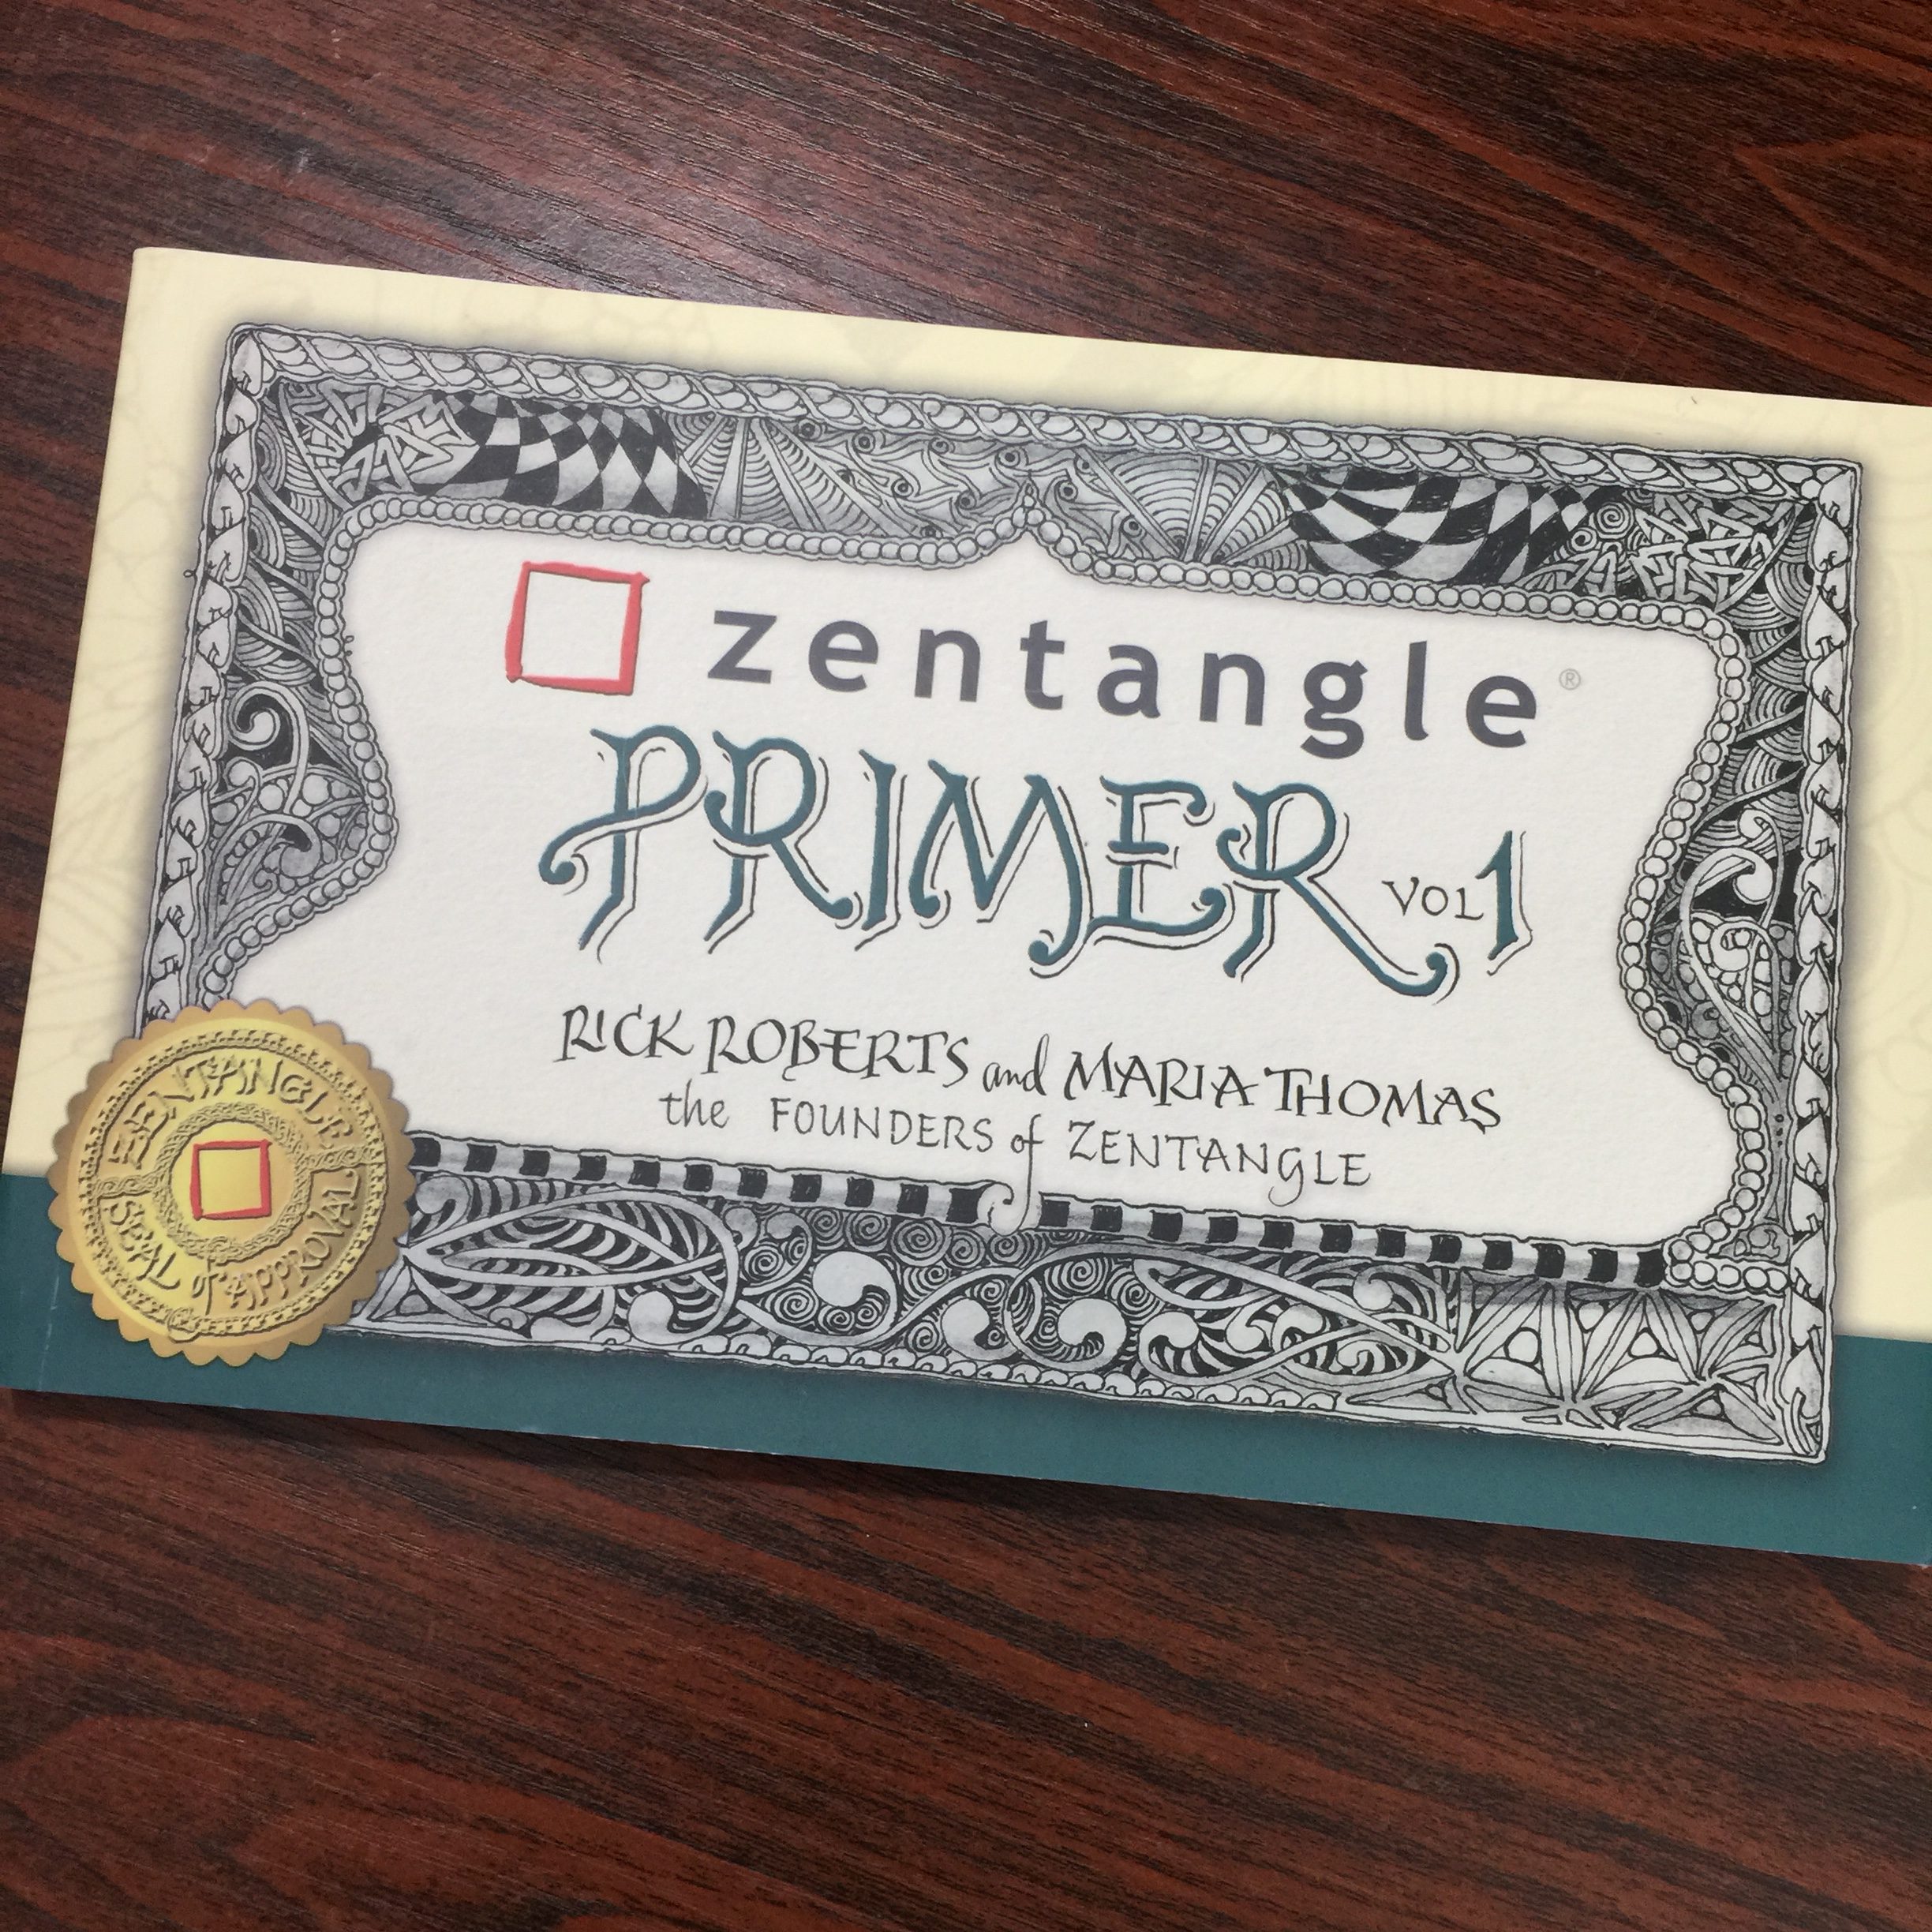 Zentangle Primer - Volume 1 is the instructional companion to The